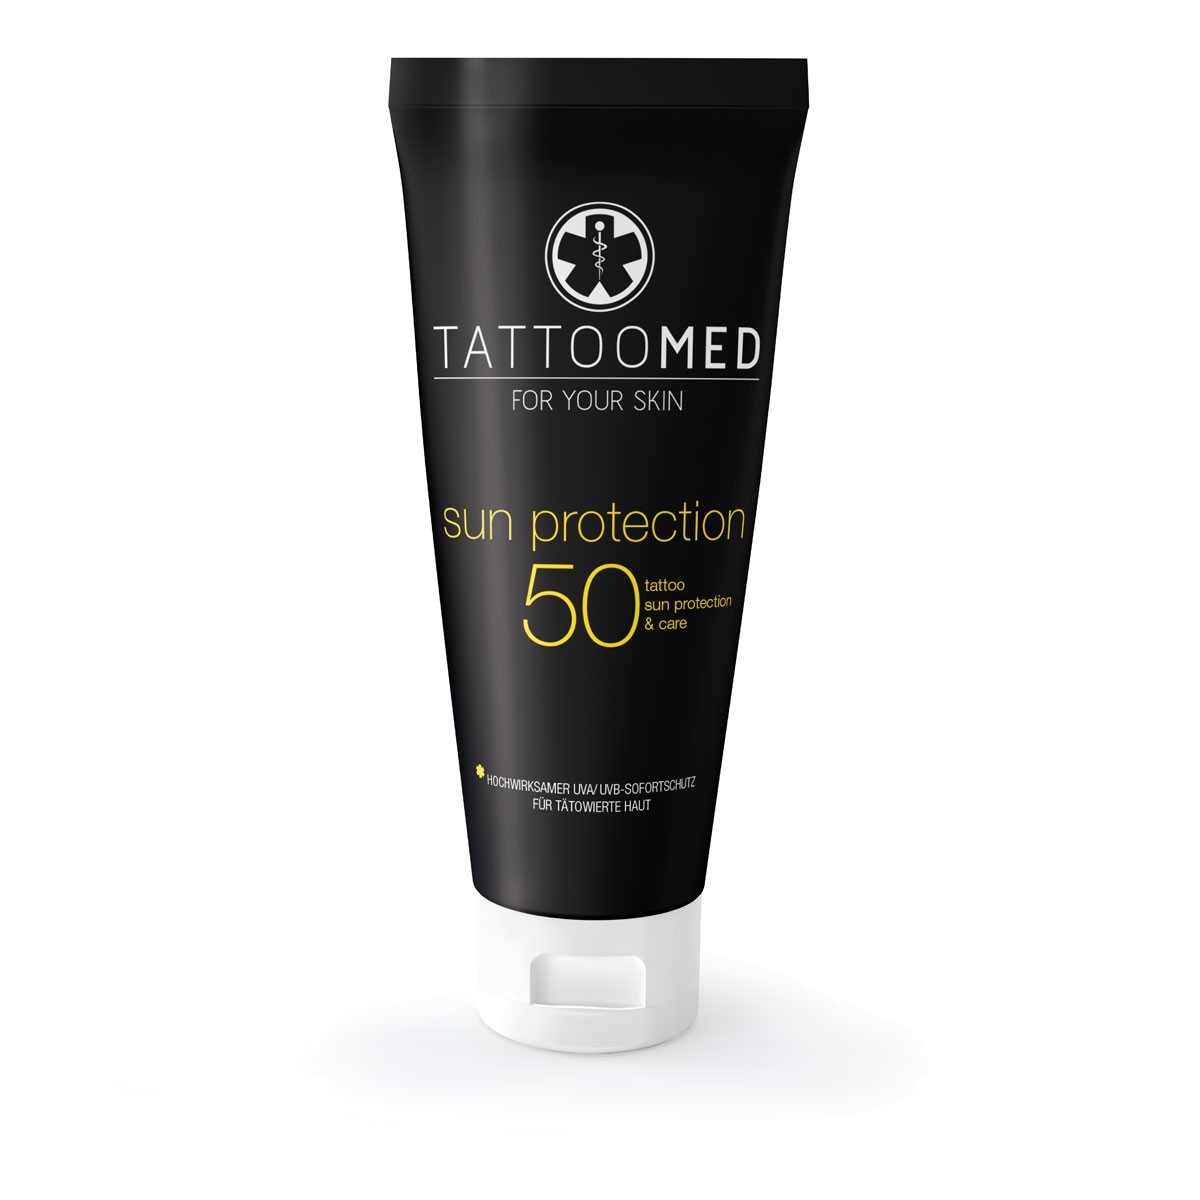 Sonnencreme Tattoomed sun protection LSF50